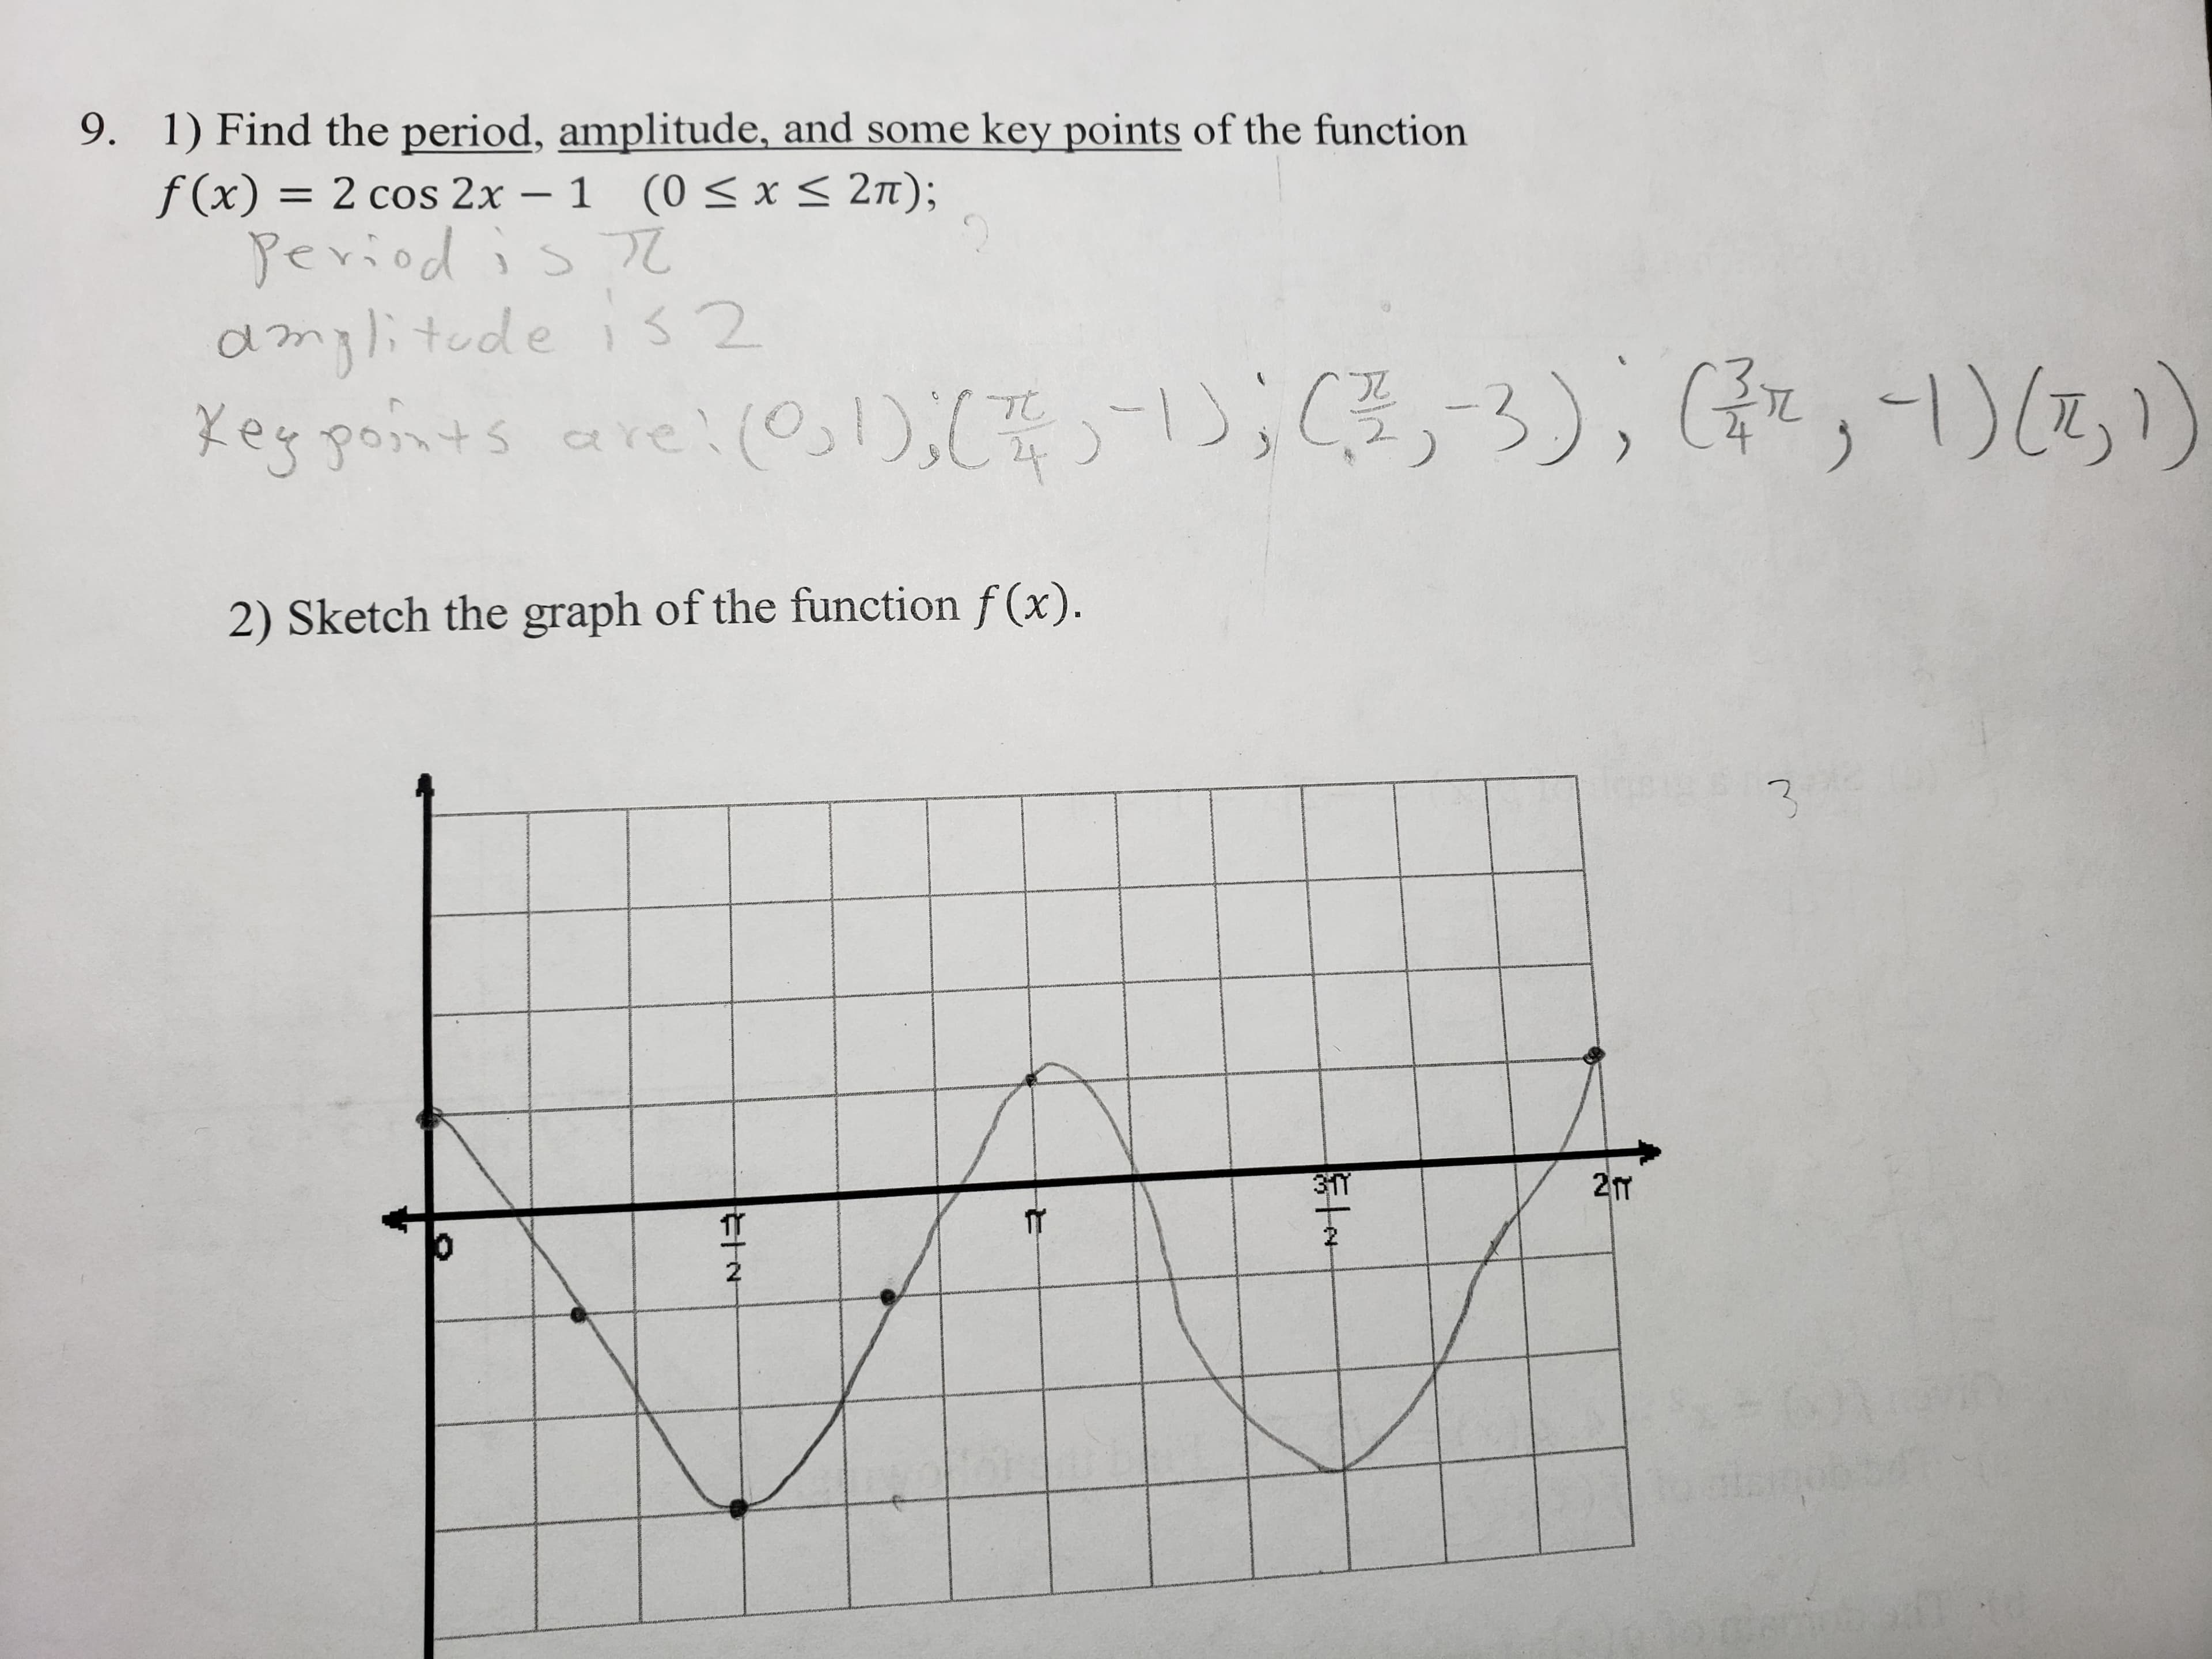 9.
1) Find the period, amplitude, and some key points of the function
f(x) = 2 cos 2x-1
2n);
(0
x
de
吡.
Y e
2) Sketch the graph of the function f(x).
2
20m
